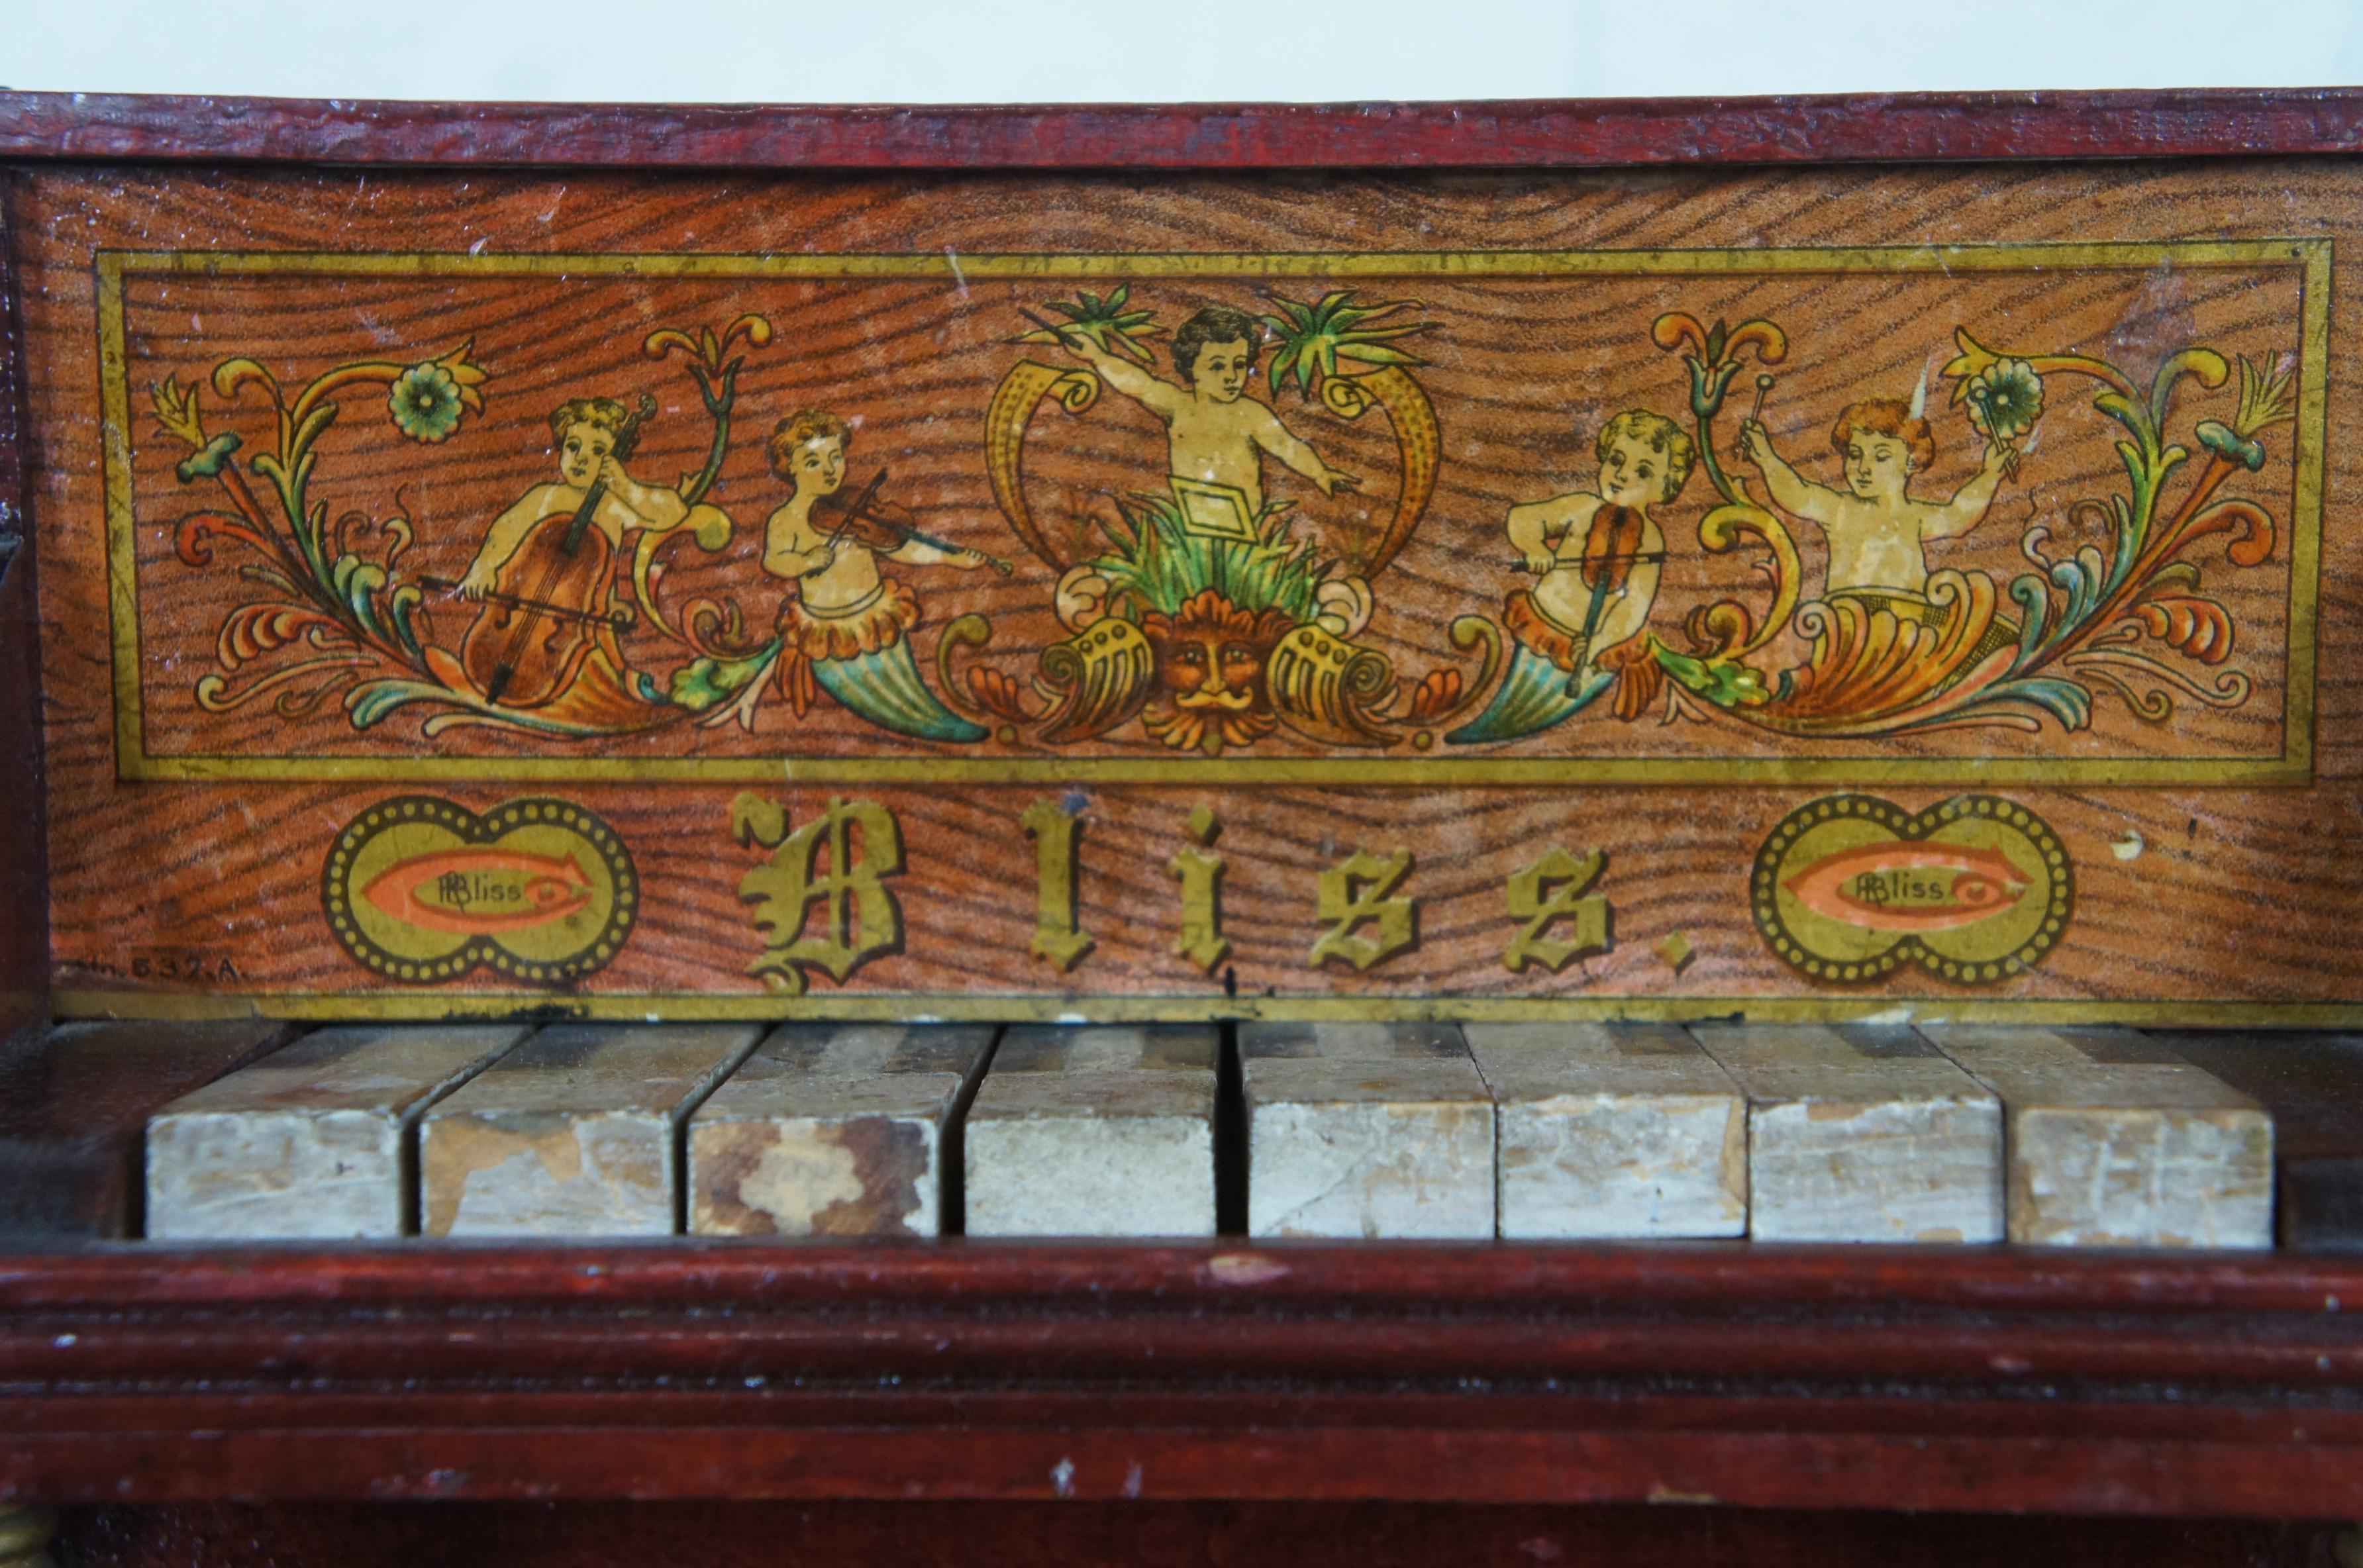 Metal Antique German Bliss Miniature Upright Toy Piano Glockenspiel Lithograph Wood